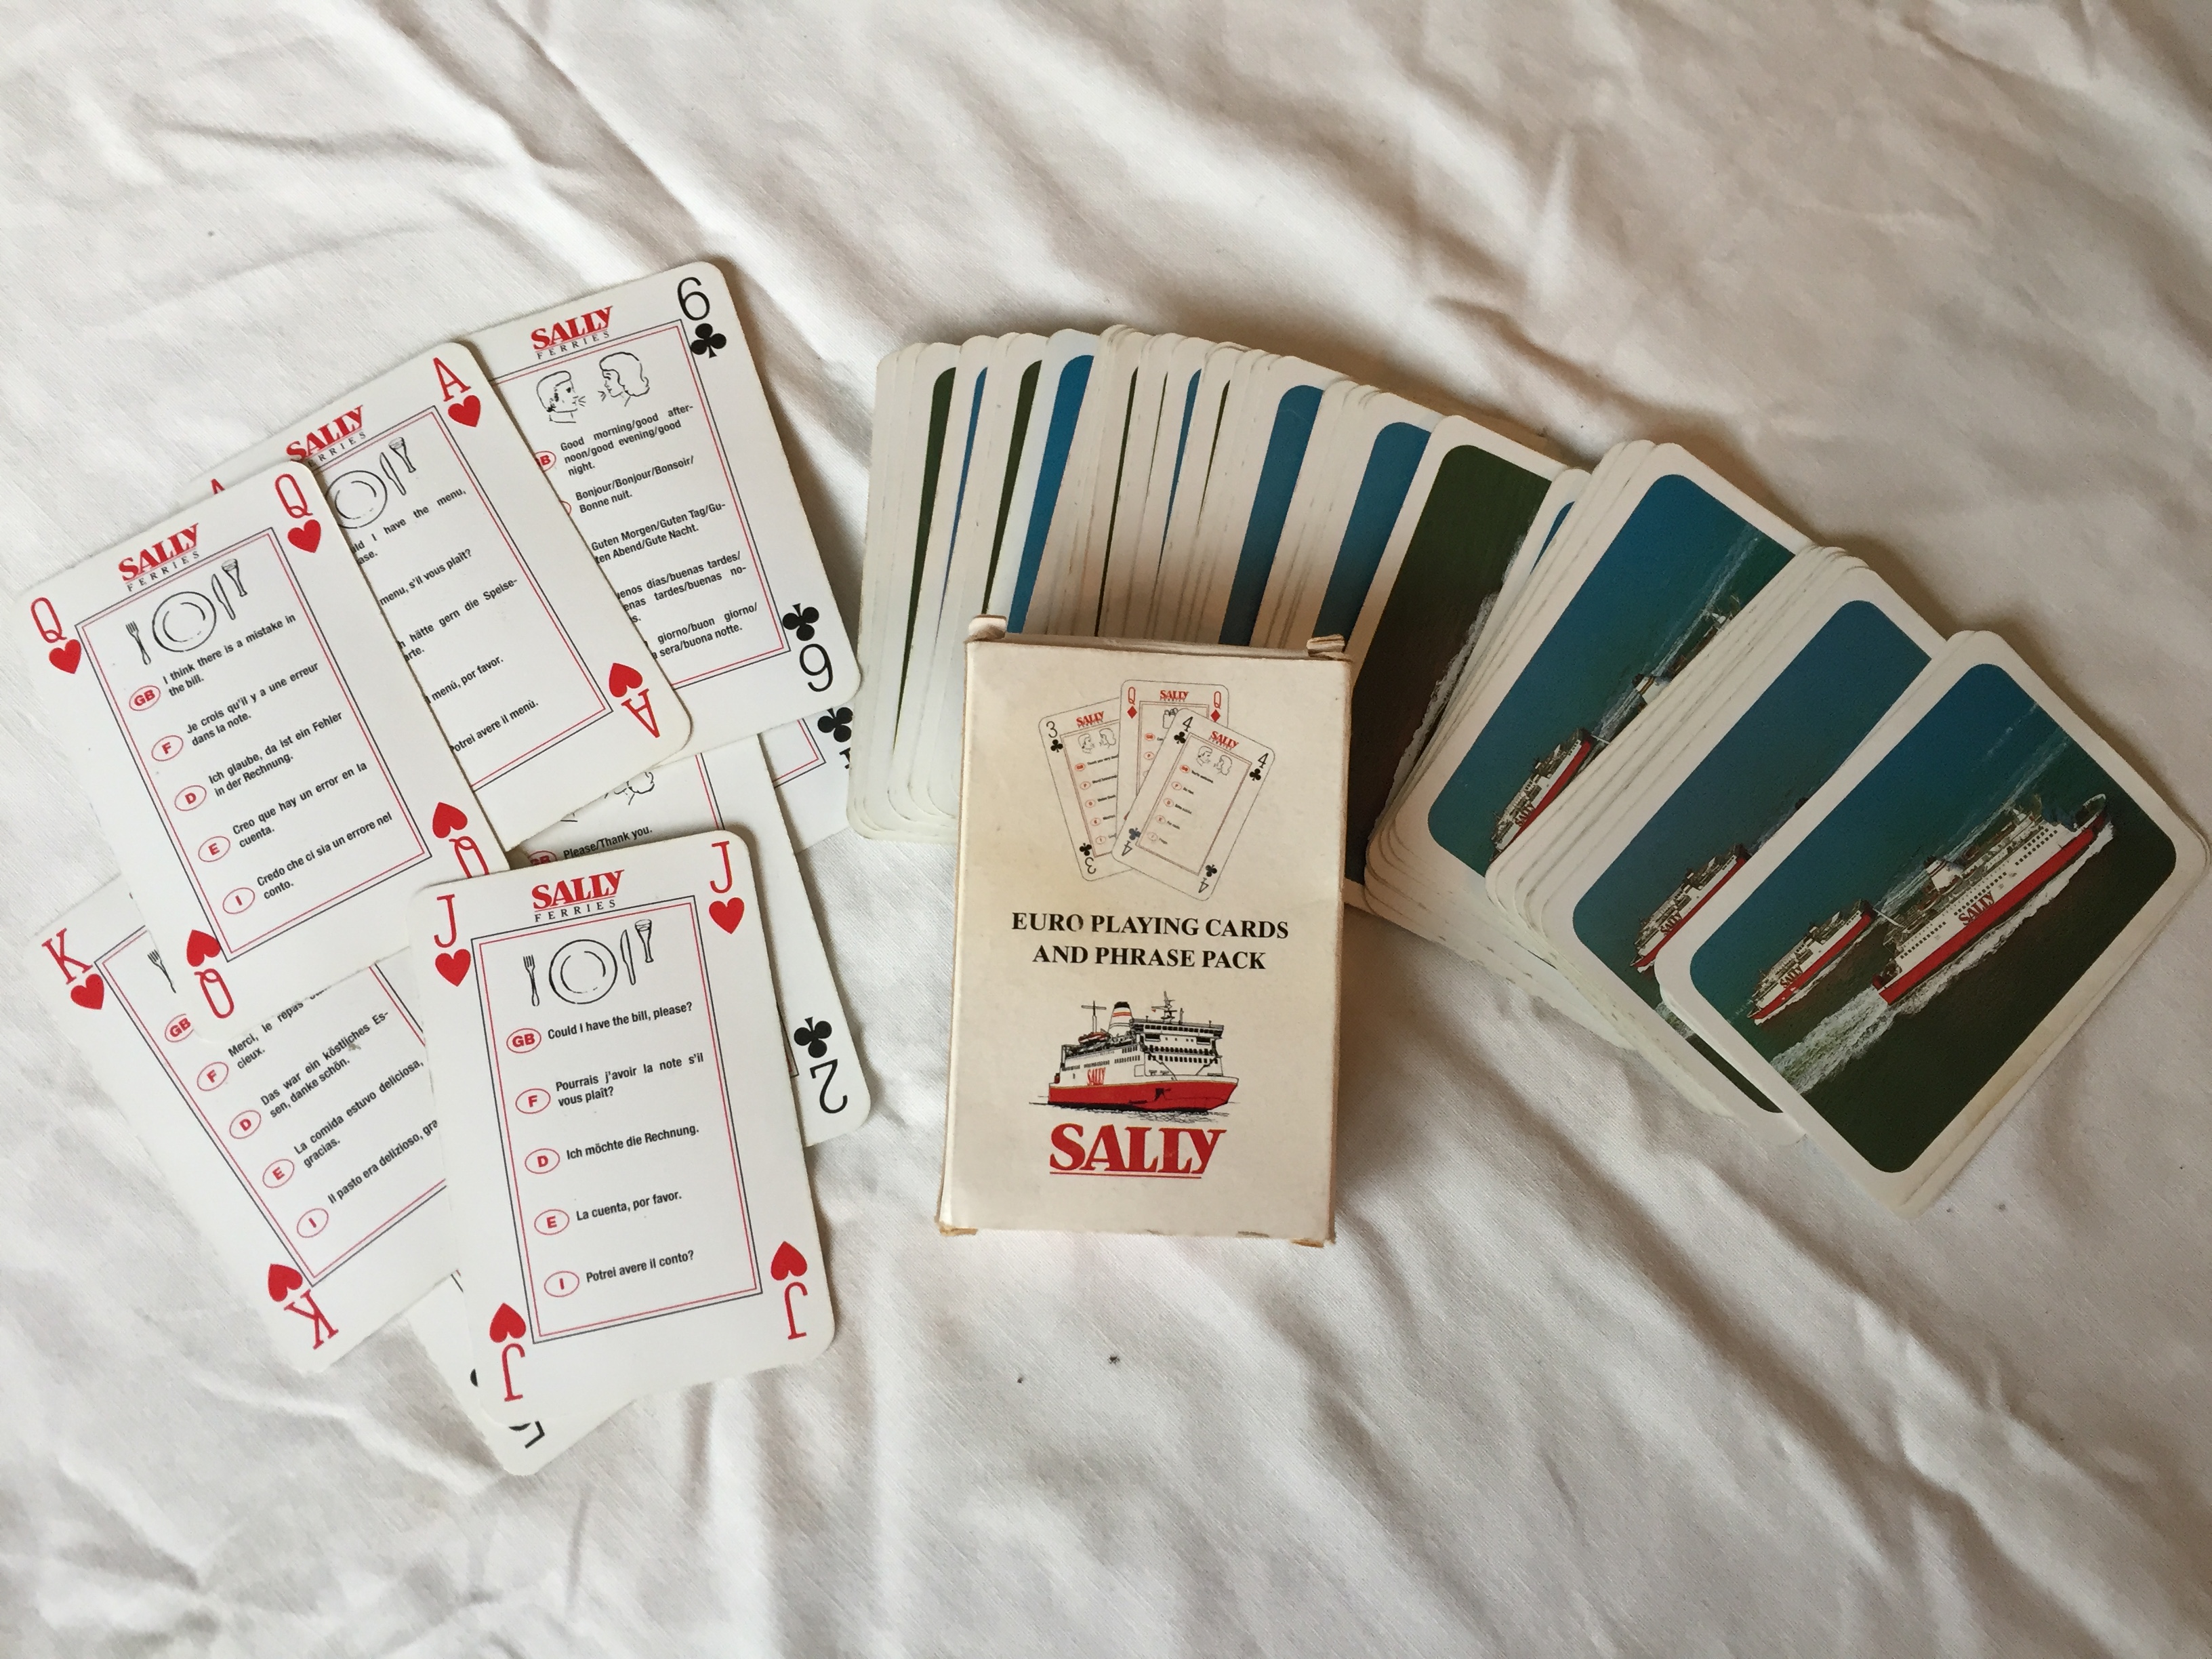 SET OF EARLY PLAYING CARDS FROM THE SALLY LINE FERRY CROSSING COMPANY 